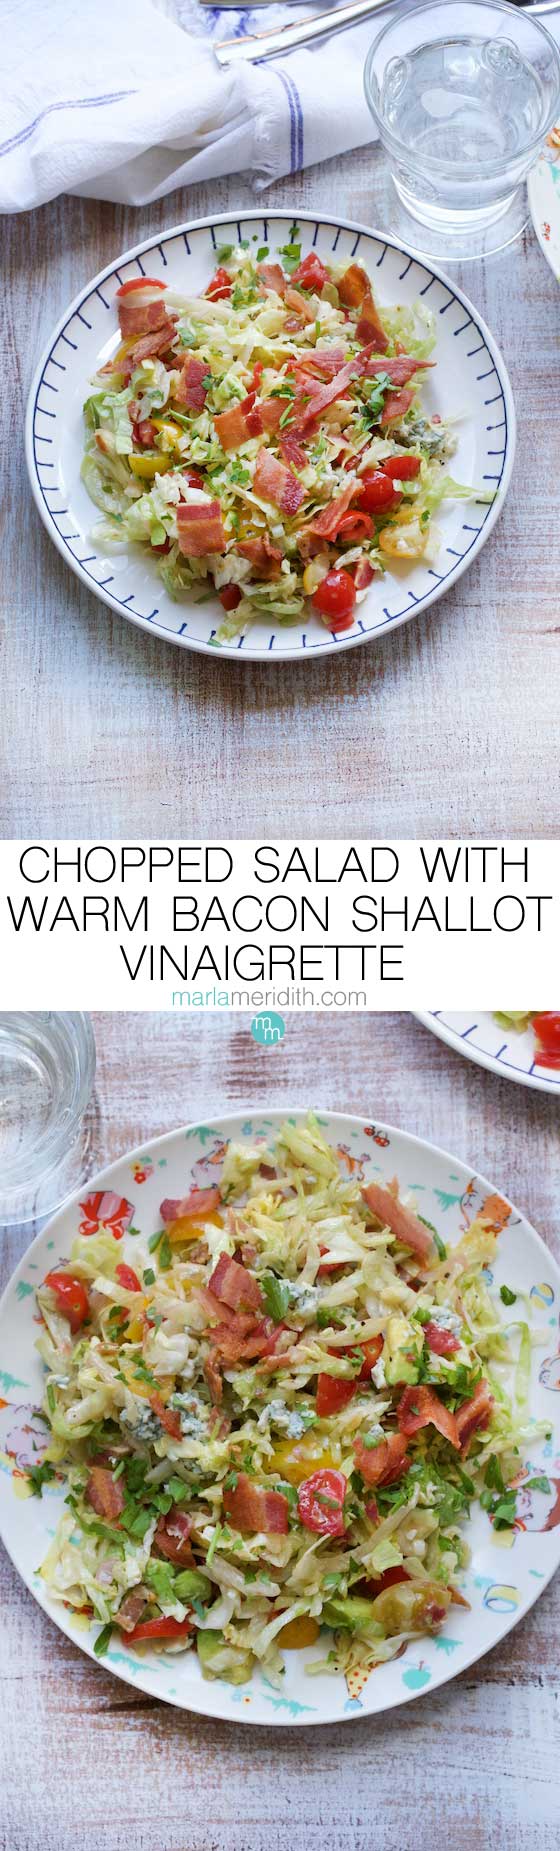 One of my all time favorites! Chopped Salad with Warm Bacon Shallot Vinaigrette recipe on MarlaMeridith.com #recipe #salad